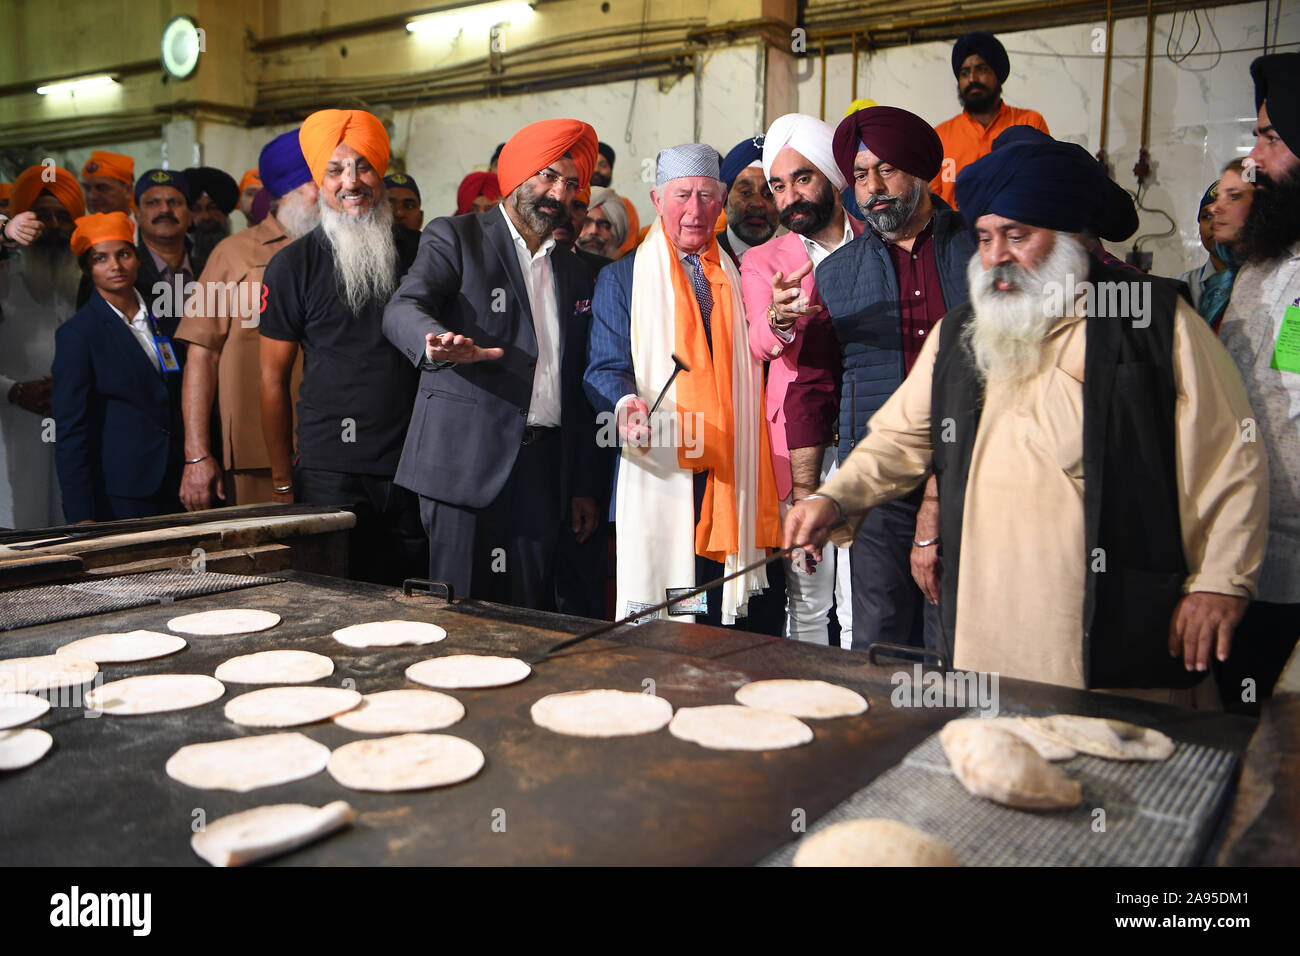 The Prince of Wales makes a chapati at the Bangla Sahib Gurdwara Sikh Temple, New Delhi, to celebrate the 550th anniversary of the birth of Guru Nanak, the founder of Sikhism, on day one of the royal visit to India. Stock Photo